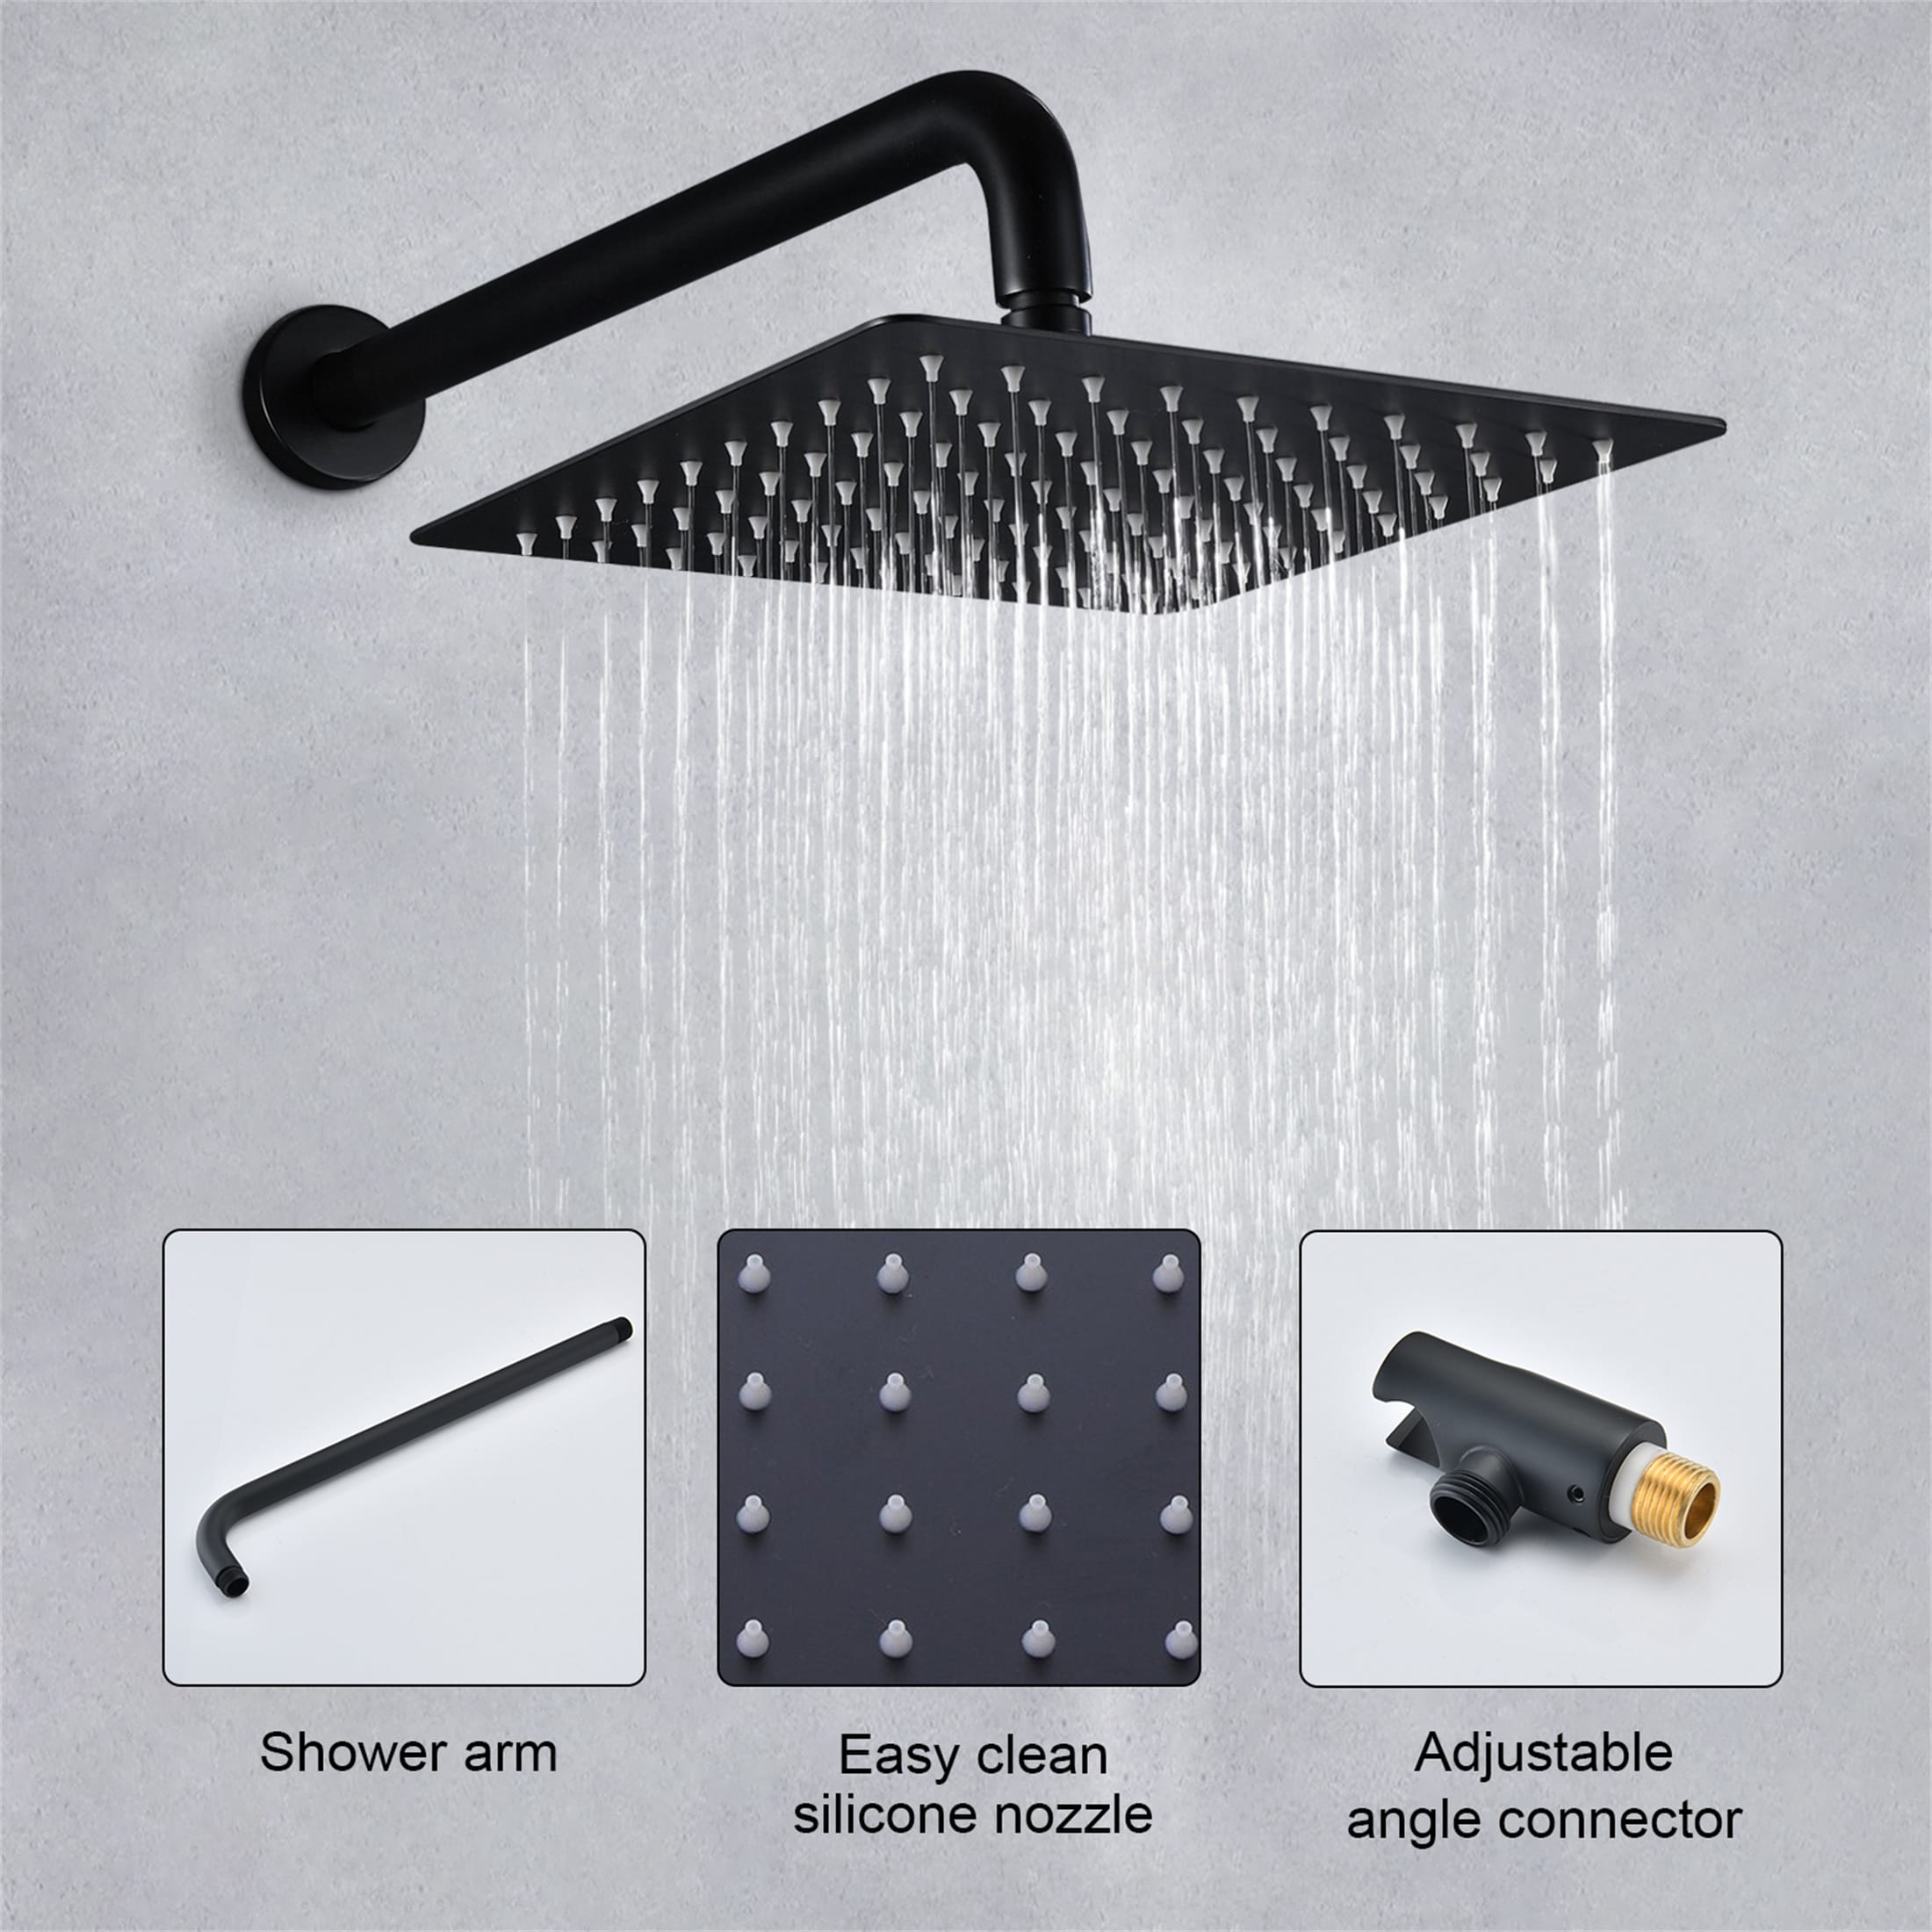 https://ak1.ostkcdn.com/images/products/is/images/direct/b77863387c2bd31cb91cd388b5f8c18876109f6b/Matte-Black-Combo-Set-Wall-Mounted-Rainfall-Shower-Head-System.jpg